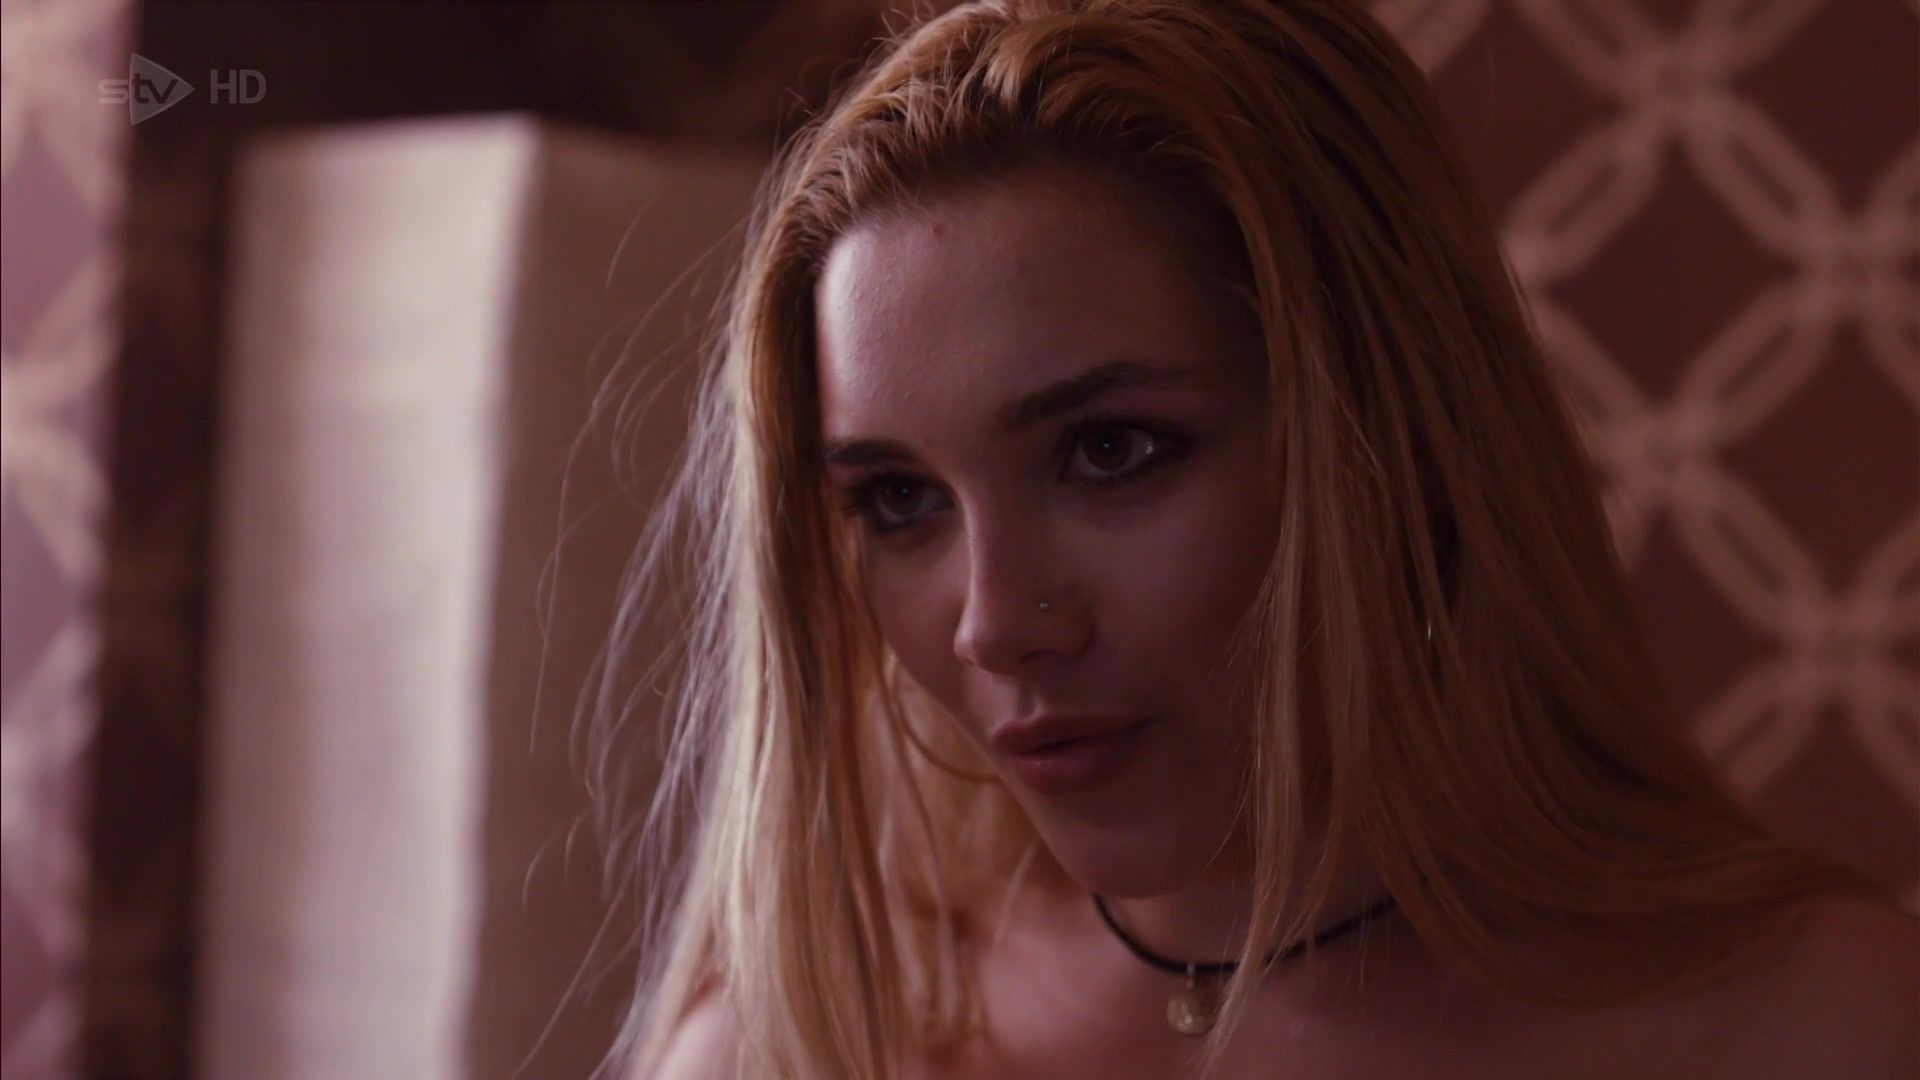 Teen Florence Pugh, Anna Friel Nude - Marcella s01e02 (2016) Blackmail - 2